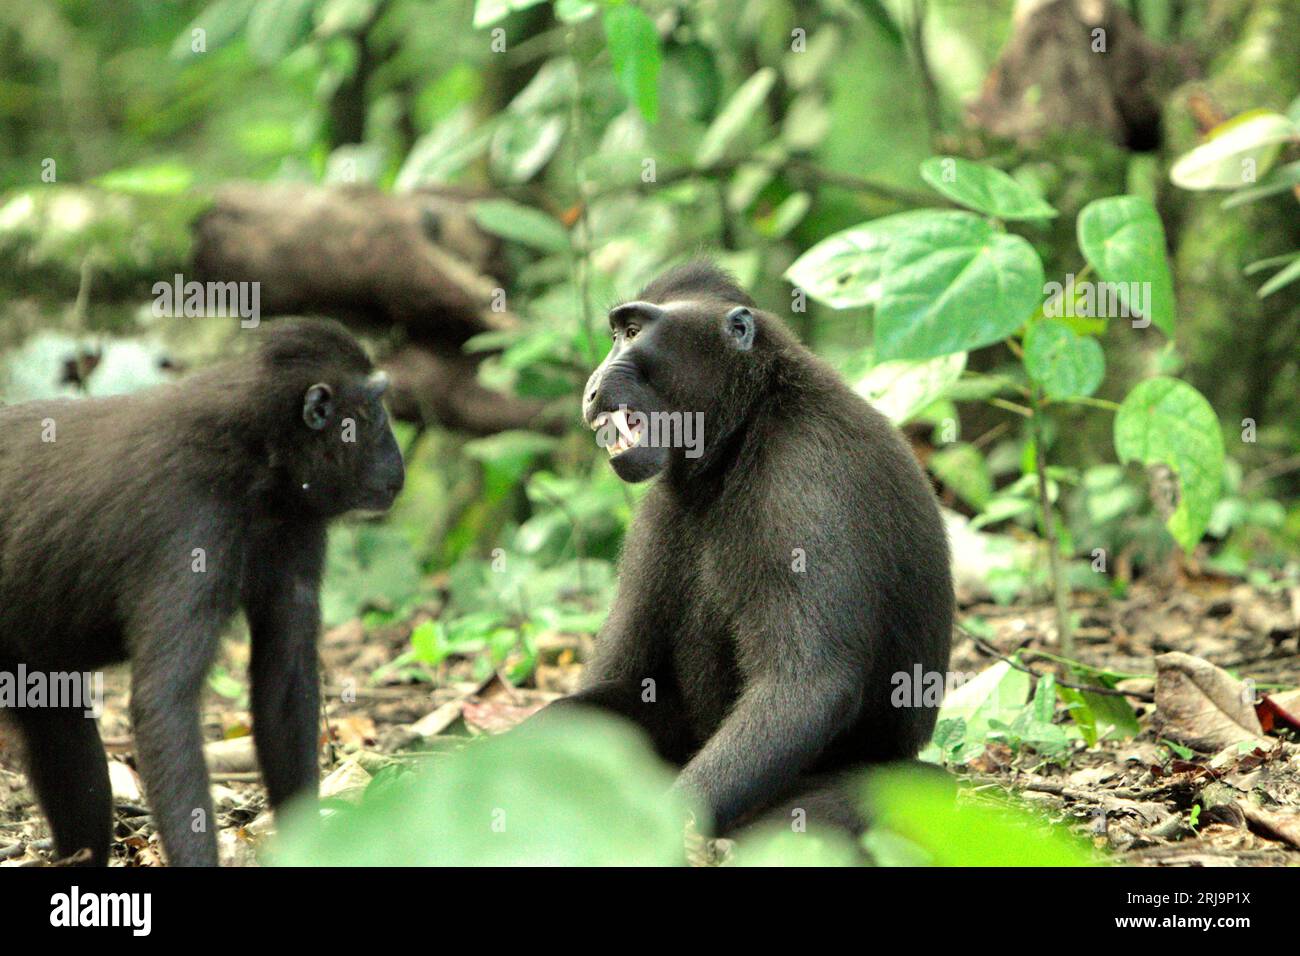 A crested macaque (Macaca nigra) shows a bared-teeth display toward another individual as they are having social activity on the ground in Tangkoko forest, North Sulawesi, Indonesia. Facial expressions (half-open mouth, open mouth bared-teeth, stare, jaw movement) in crested macaques are defined as threat, according to primate scientists. However, a “neutral” face (face without movement) in primates is still communicating something. In this threatened species, 'the neutral face was more closely associated with a conflict outcome than screams and threat faces, suggesting that the absence of... Stock Photo